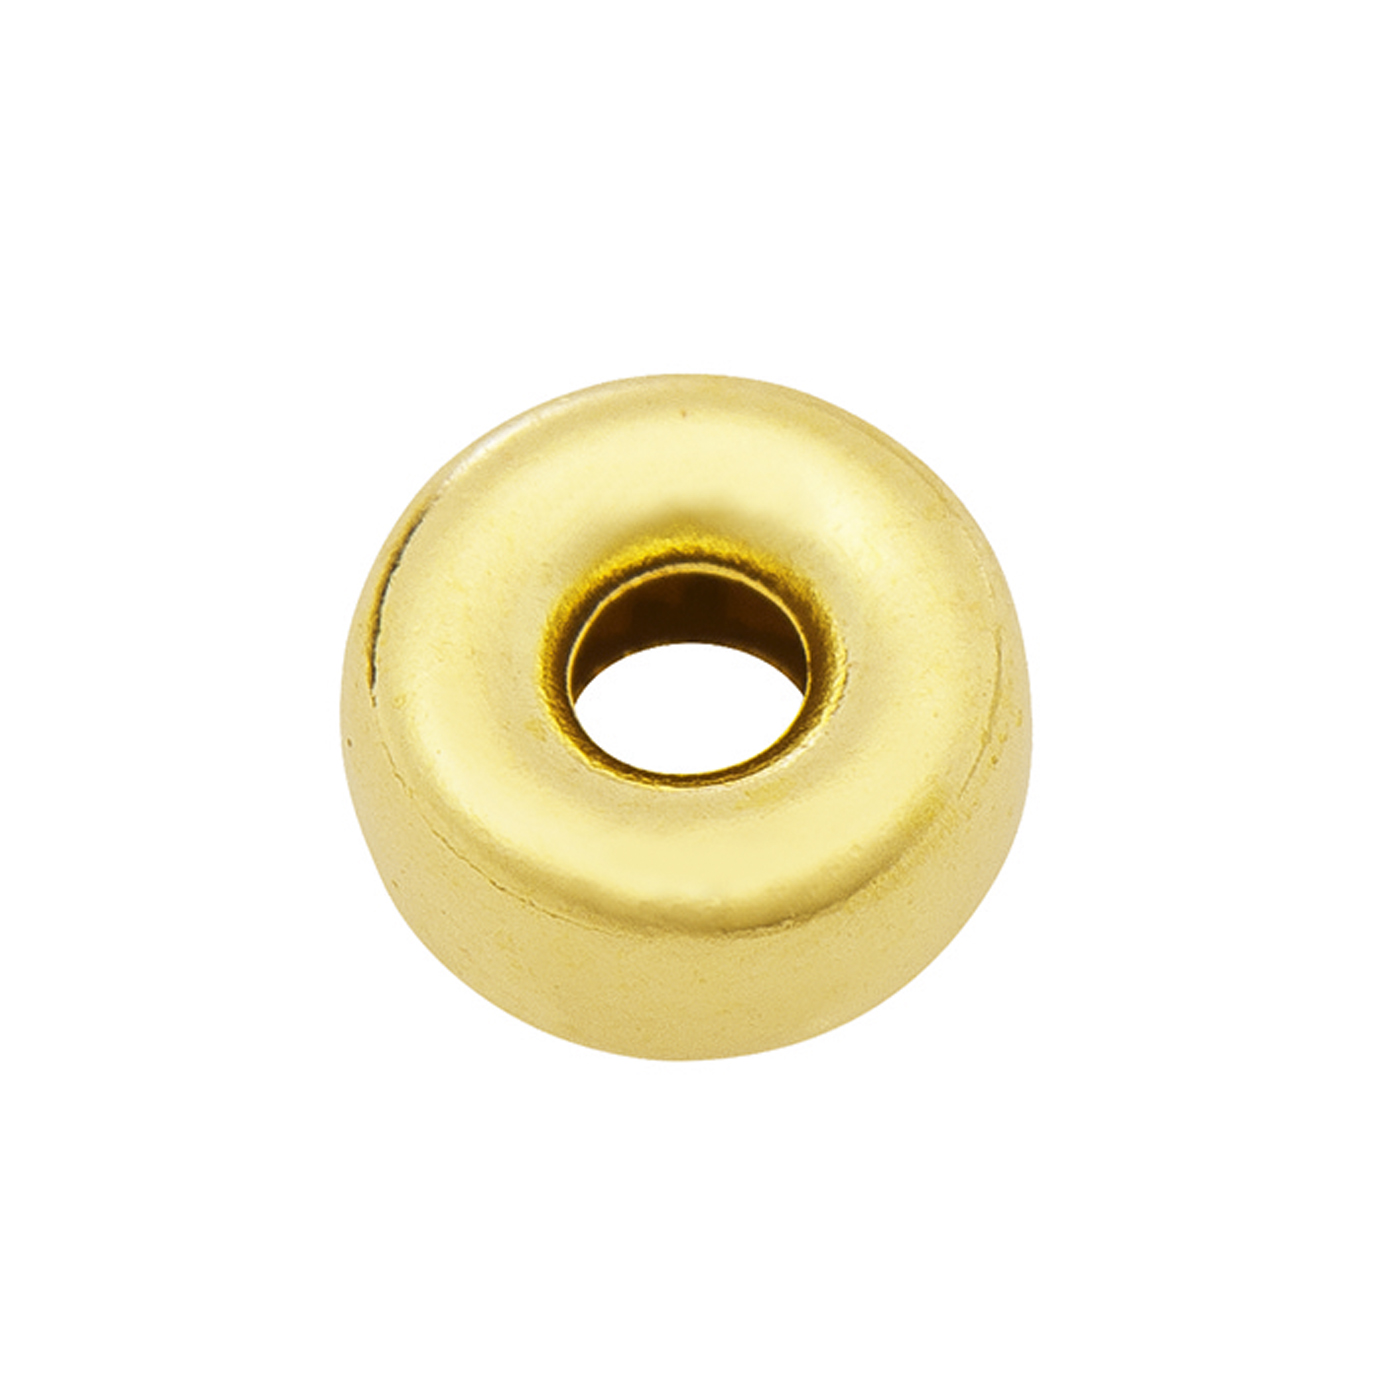 Hollow Ring, Rolled Gold Polished, ø 4 x 2.5 mm - 1 piece